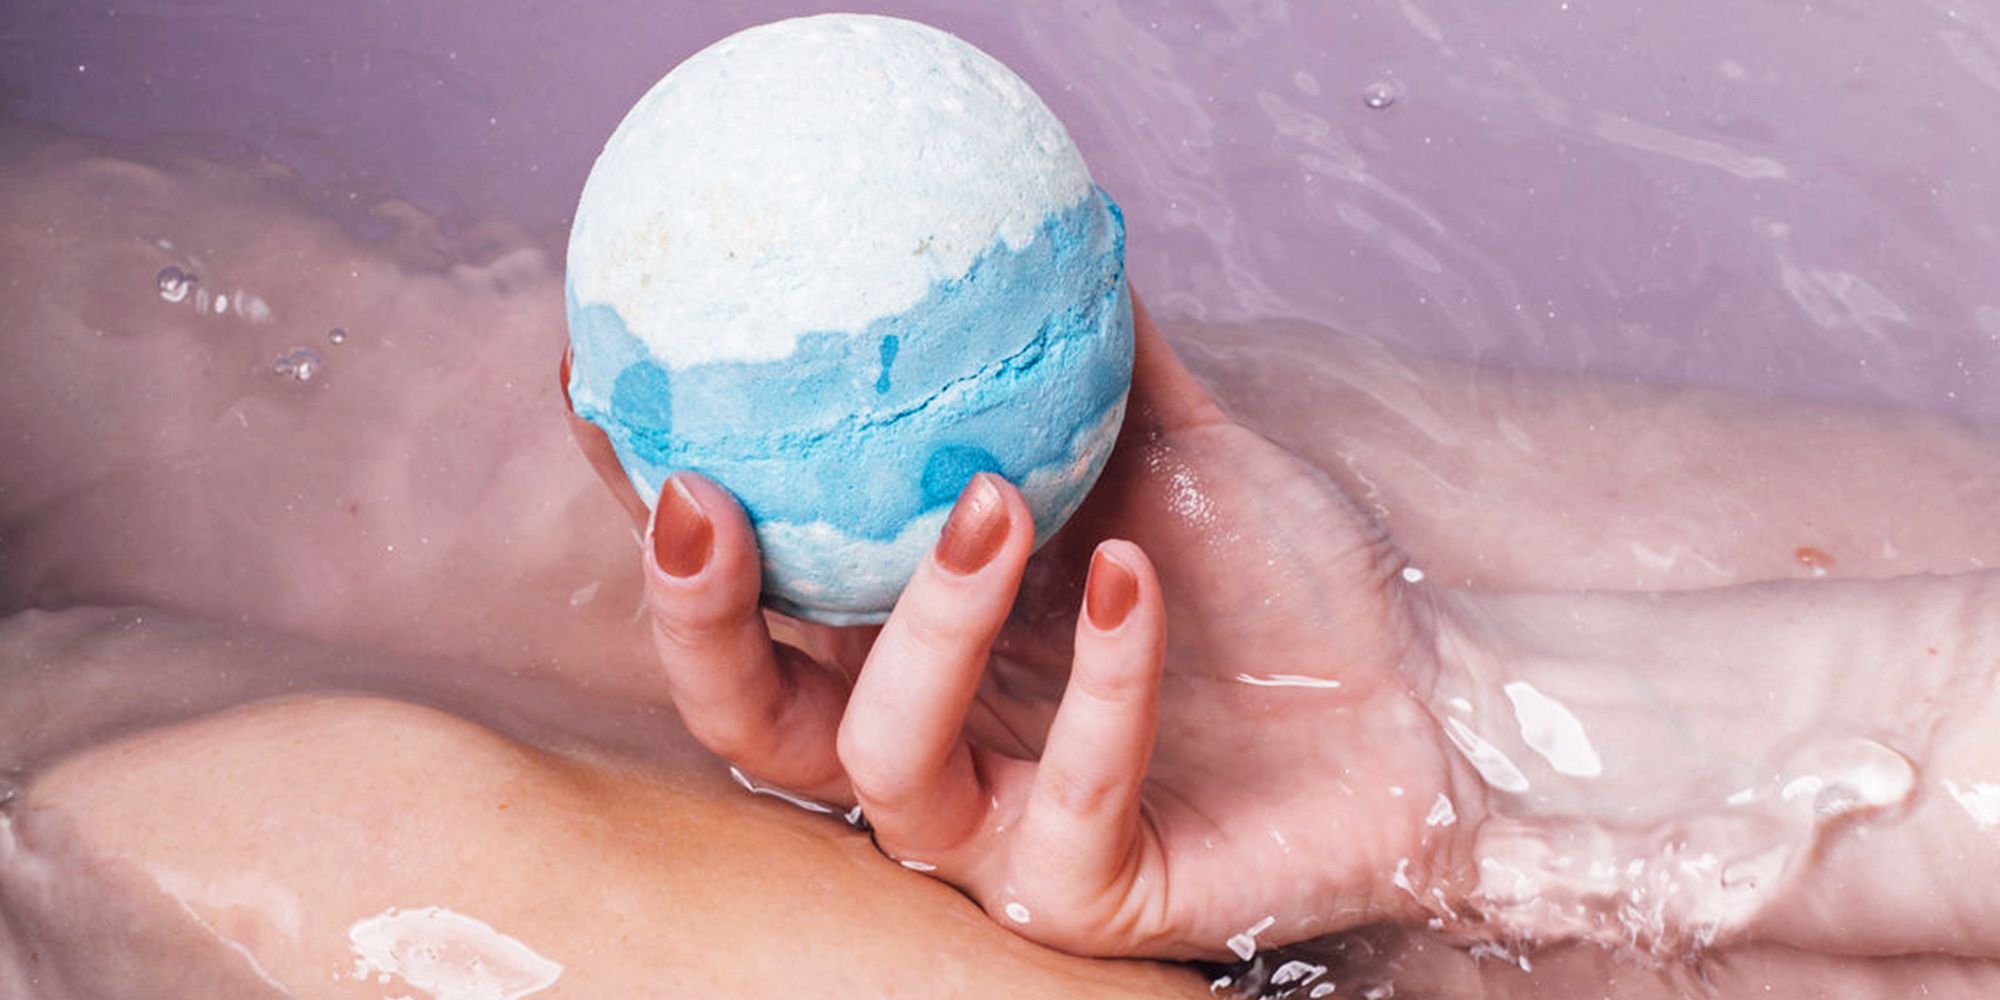 What are the benefits of using CBD bath bombs in your bath?